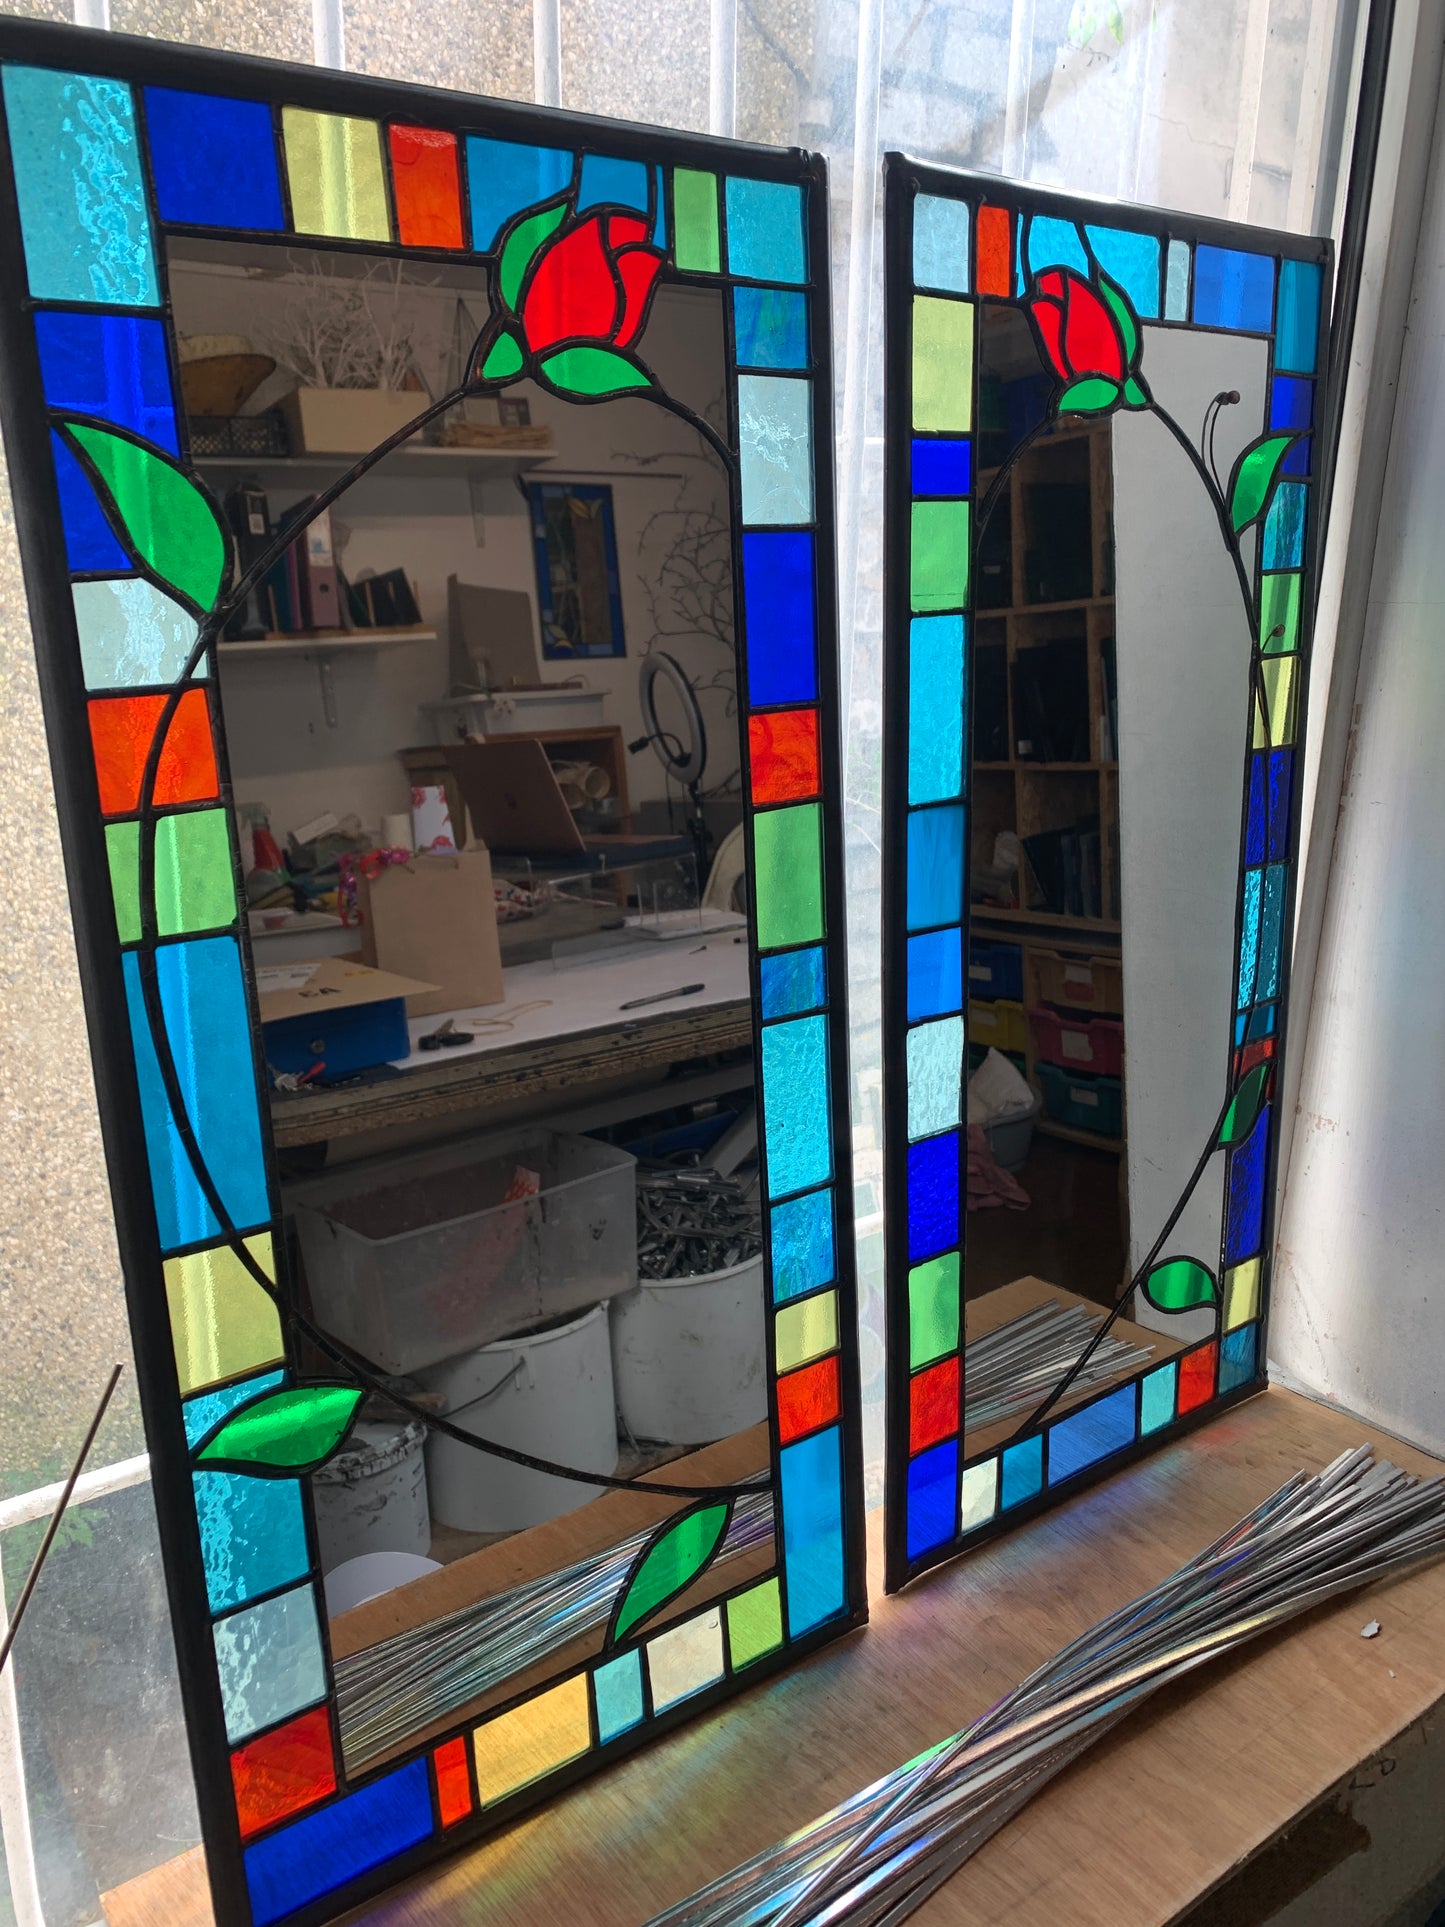 Tall slim stained glass mirror with random colours in various sizes in the border. Red rose bud detail with a long stem cut into the mirror glass and border. Copperwire attached to the back for hanging.